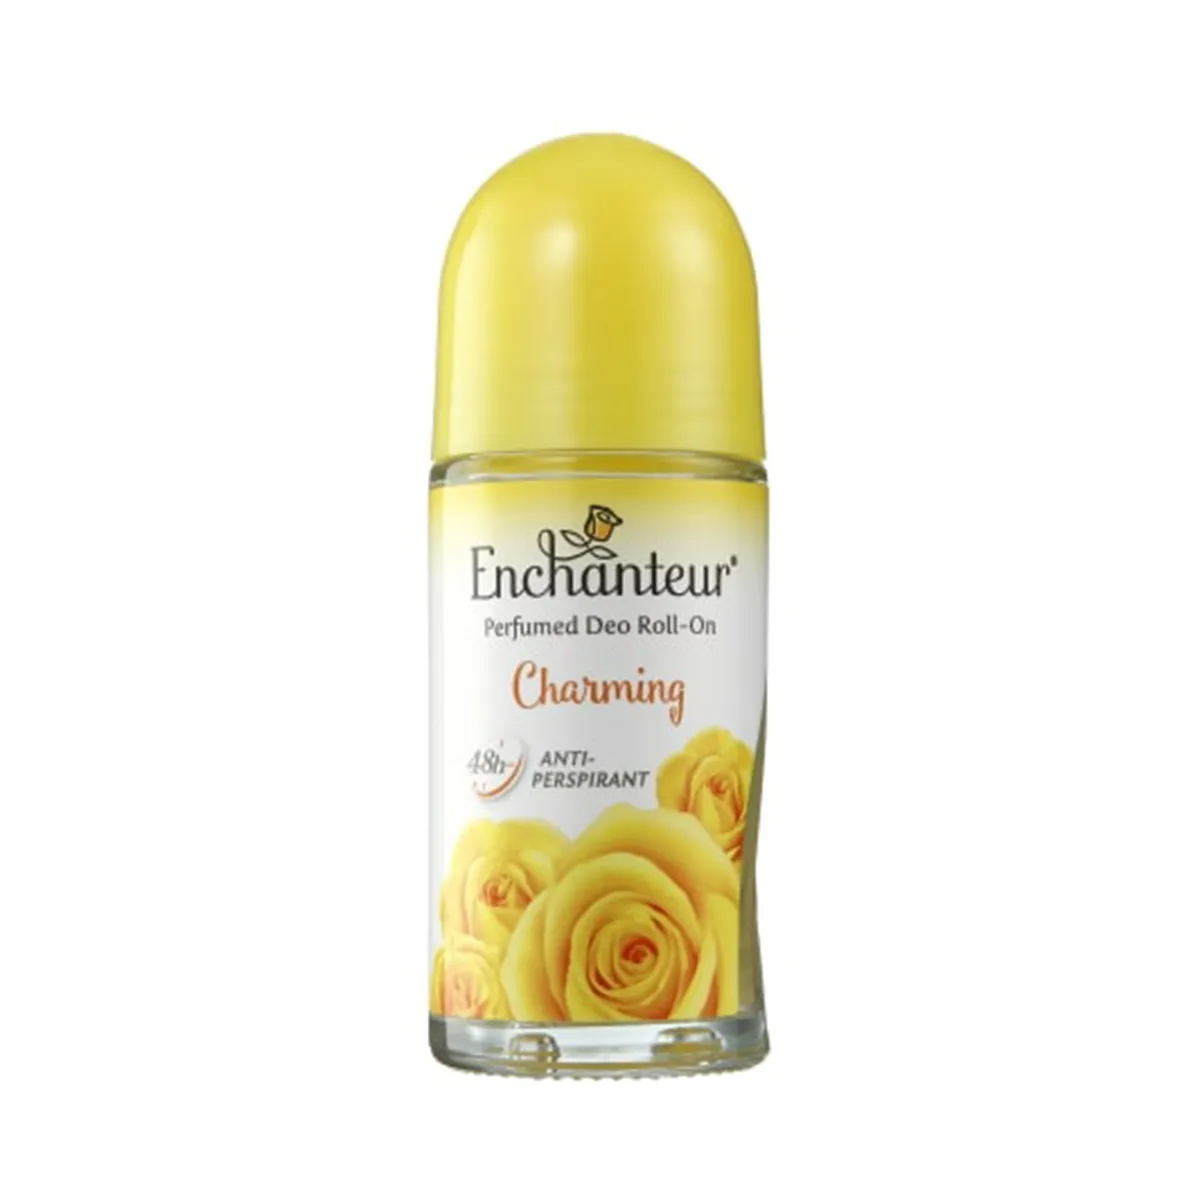 First product image of Enchanteur Charming Perfumed Deodorant Roll - 50ml